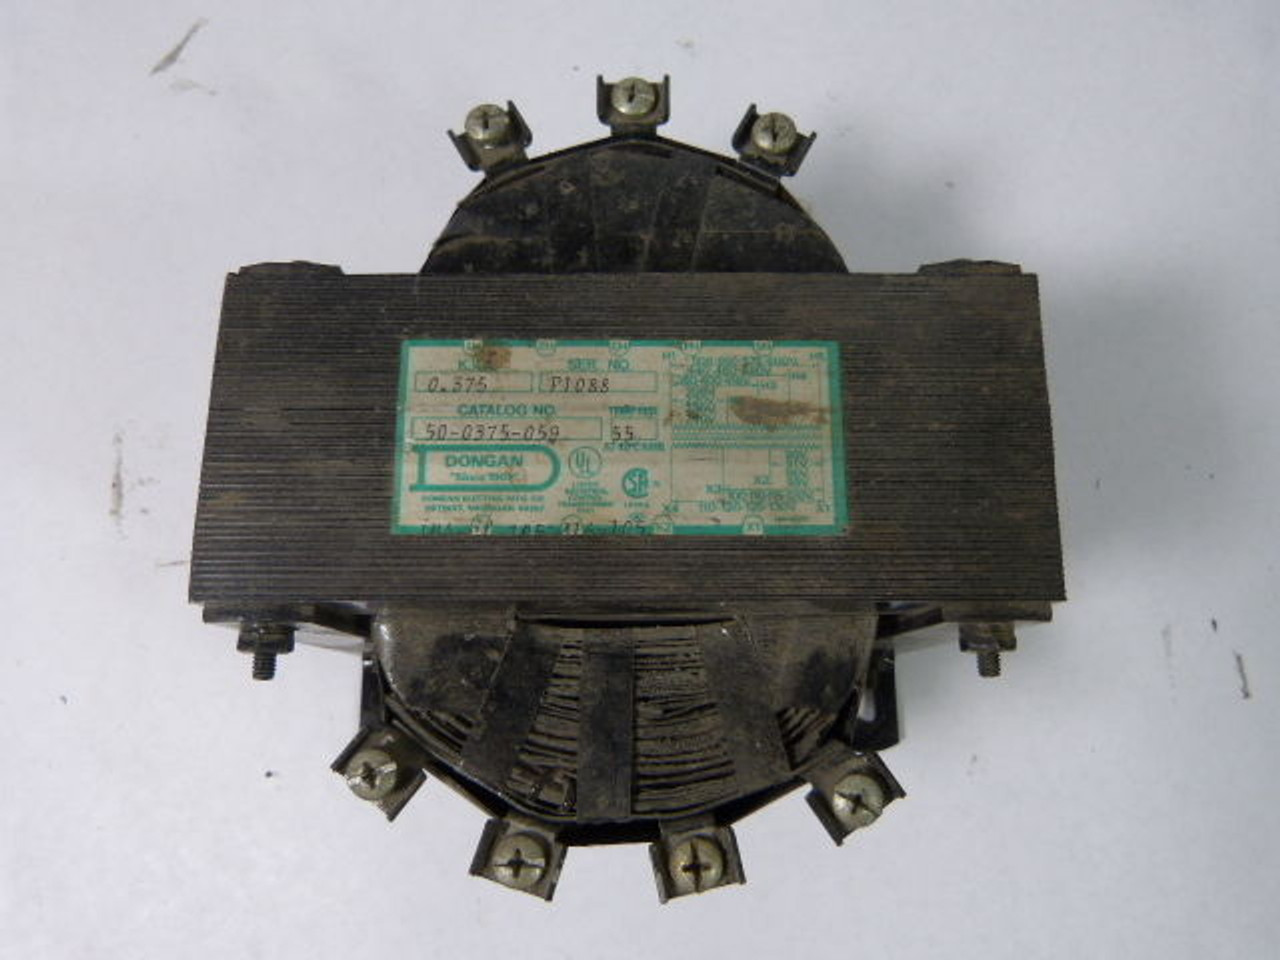 Dongan 50-0375-059 Industrial Control Transformer USED